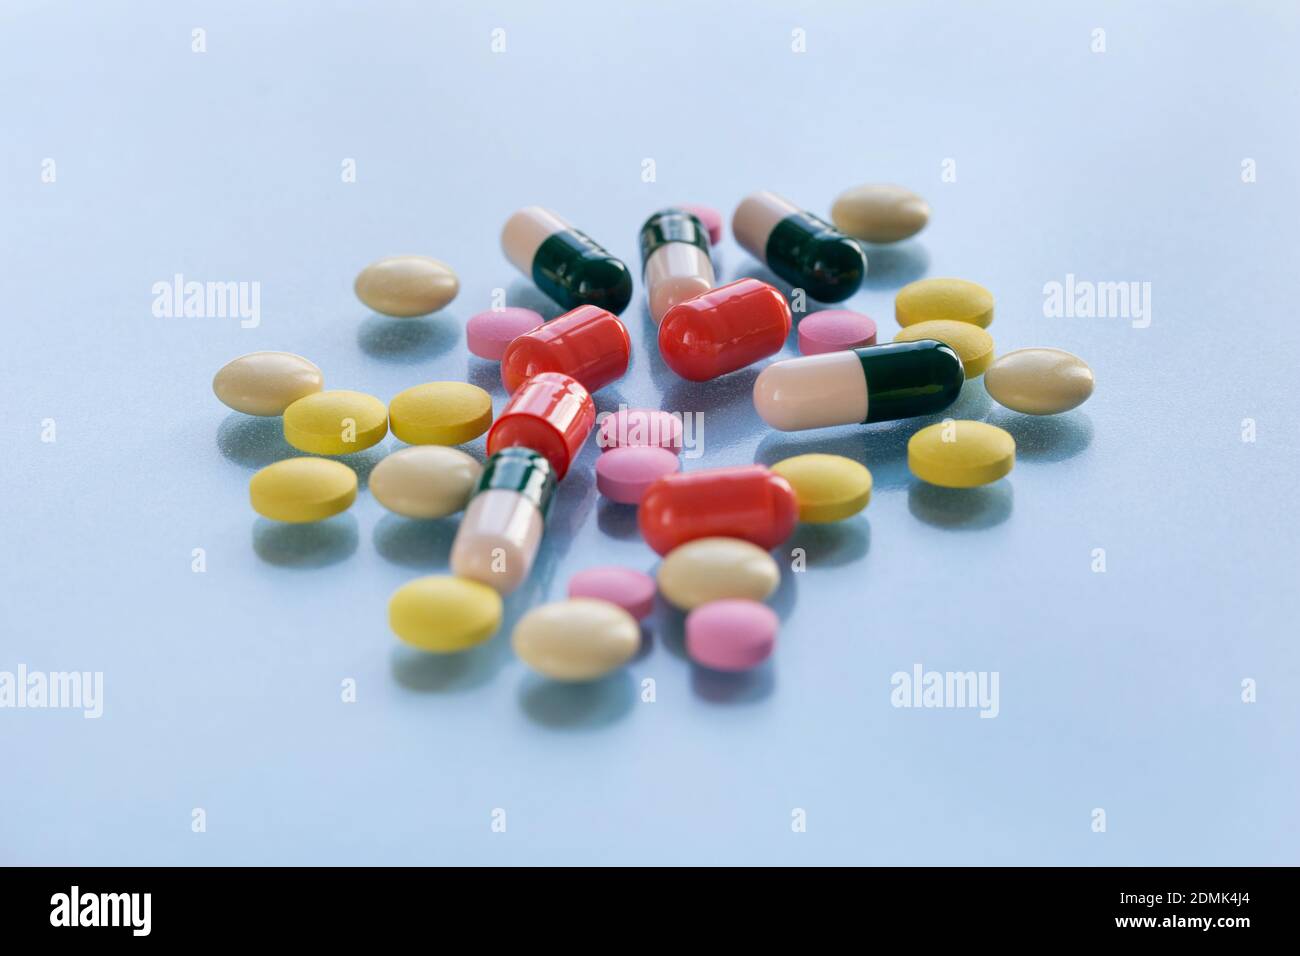 Colorful pills and capsules isolated on a blue background. Medical health or drugs addiction concept. Copy space for you text. Stock Photo